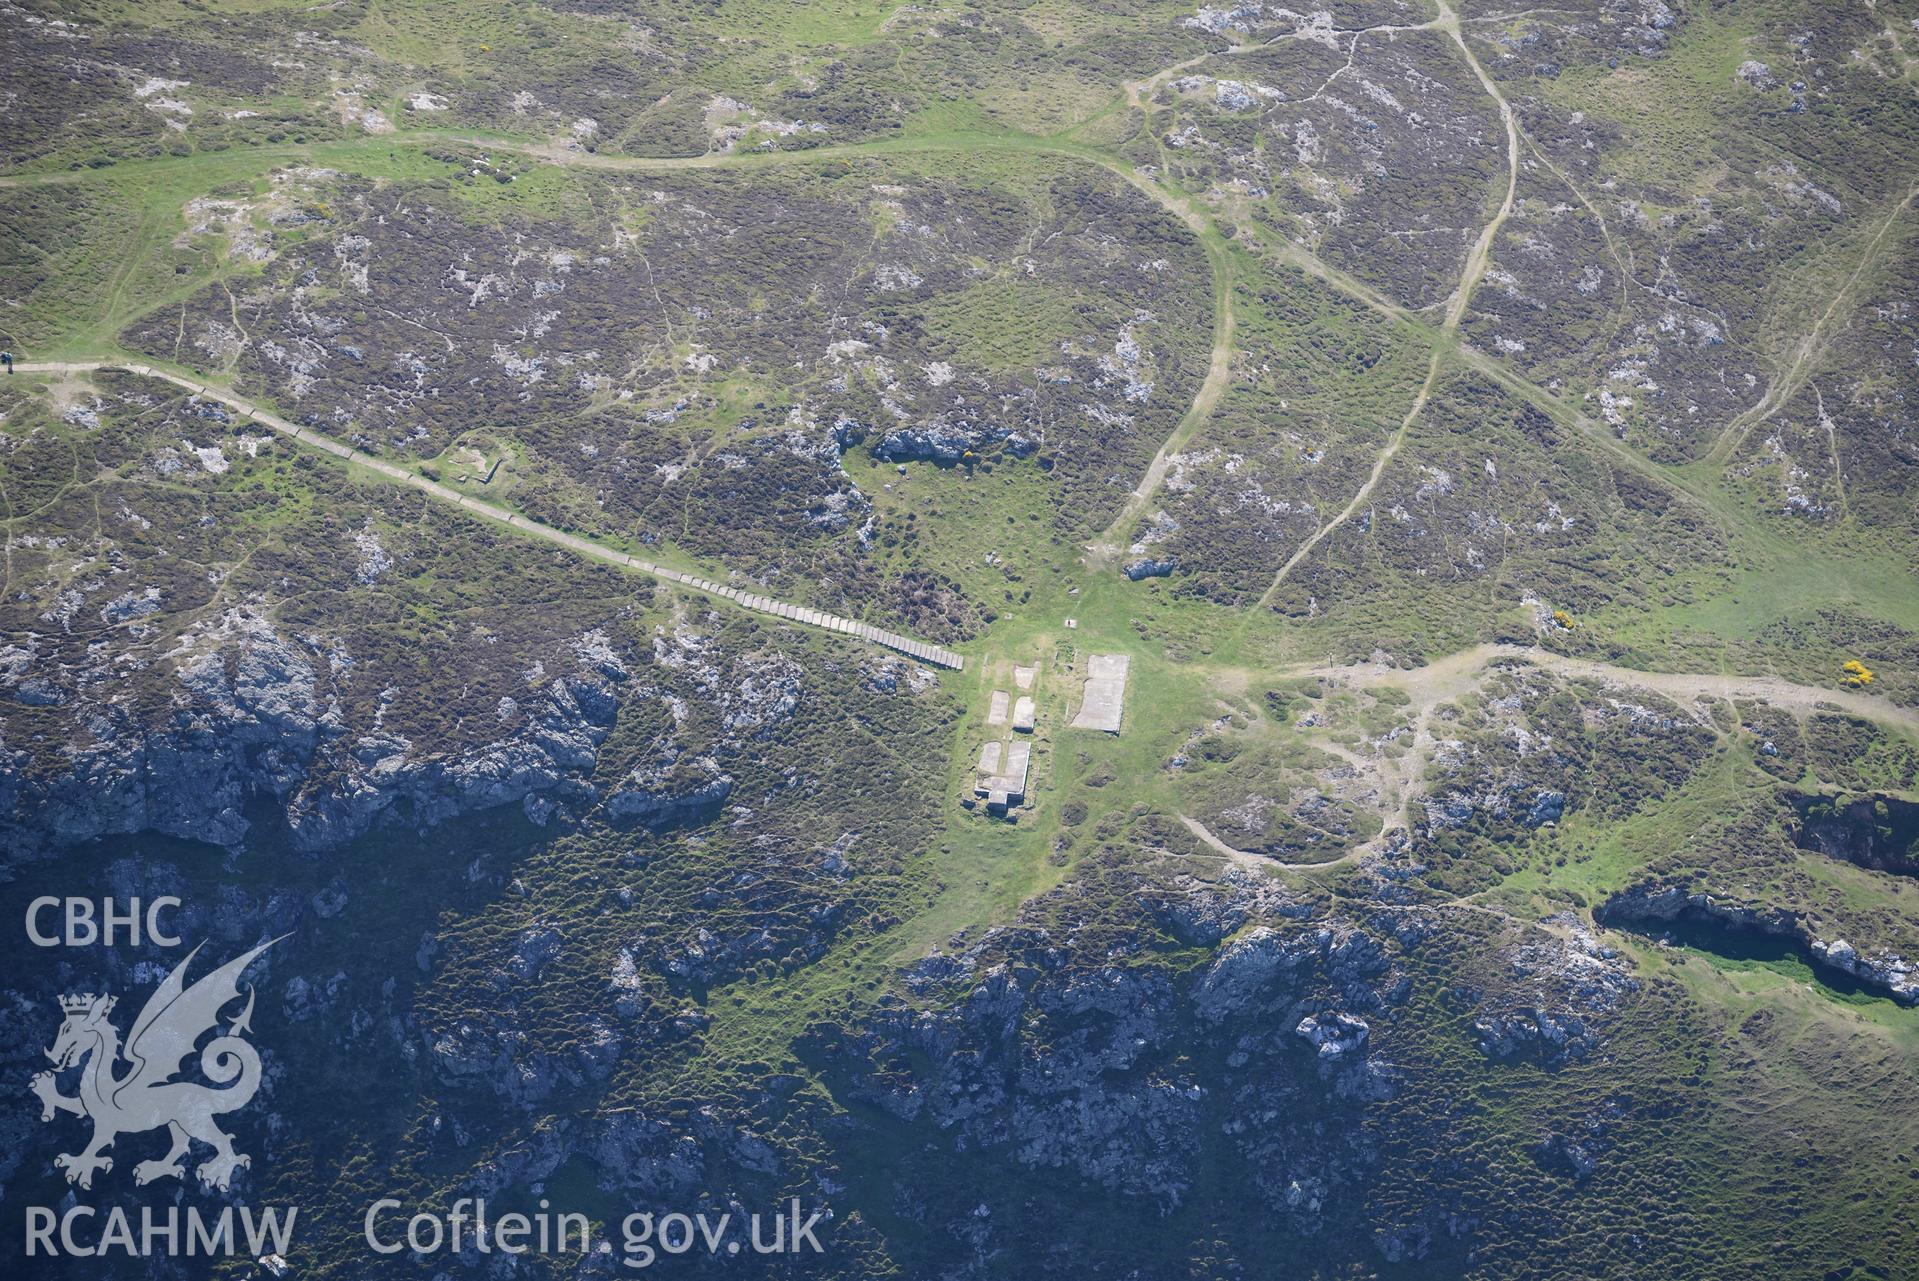 Aerial photography of Mynydd Mawr signal station taken on 3rd May 2017.  Baseline aerial reconnaissance survey for the CHERISH Project. ? Crown: CHERISH PROJECT 2017. Produced with EU funds through the Ireland Wales Co-operation Programme 2014-2020. All material made freely available through the Open Government Licence.